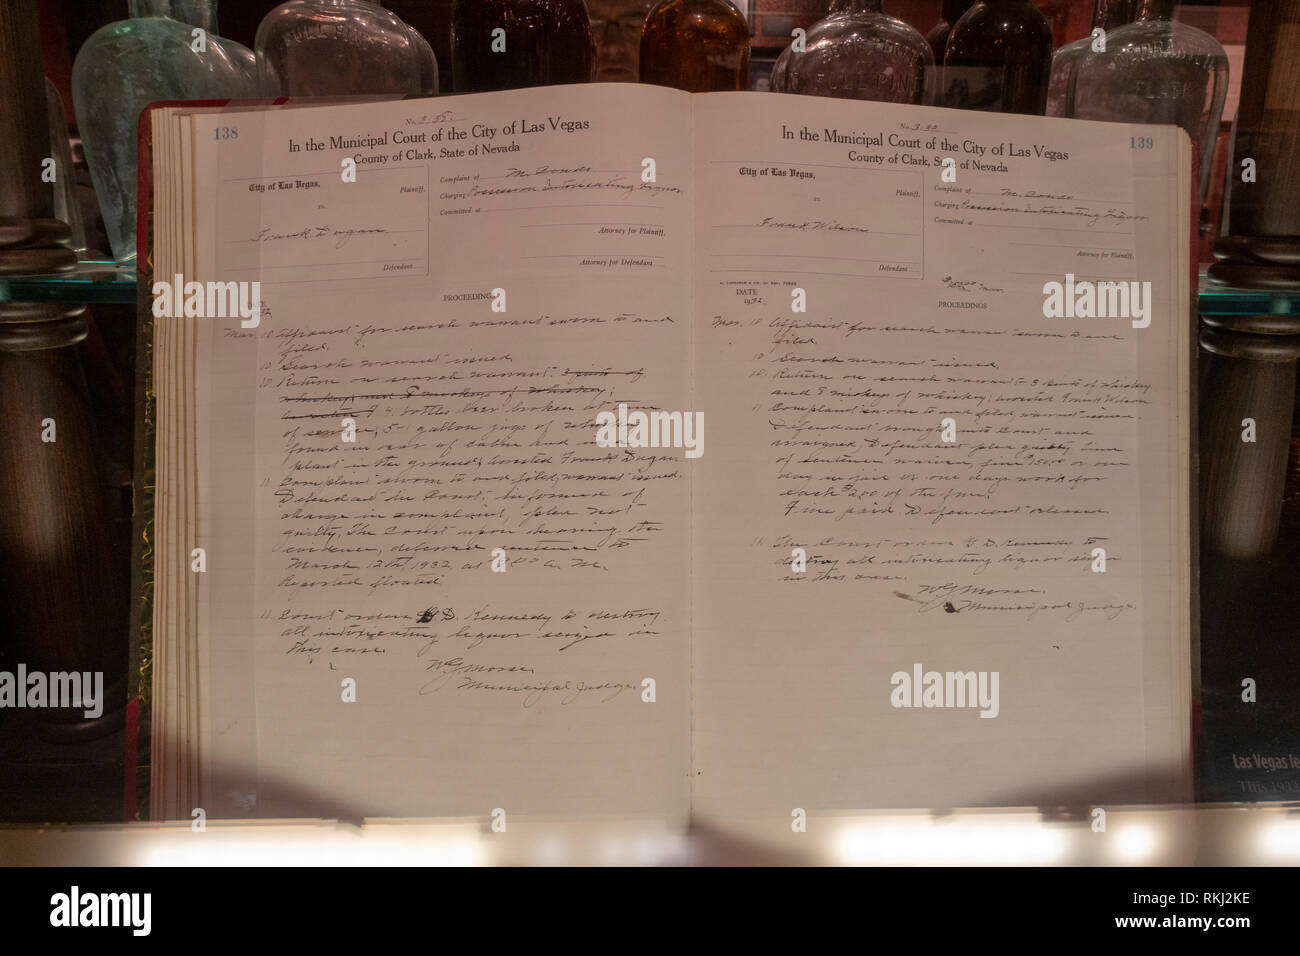 City of Las Vegas court papers, The Mob Museum, Las Vegas (City of Las Vegas), Nevada, United States. Stock Photo